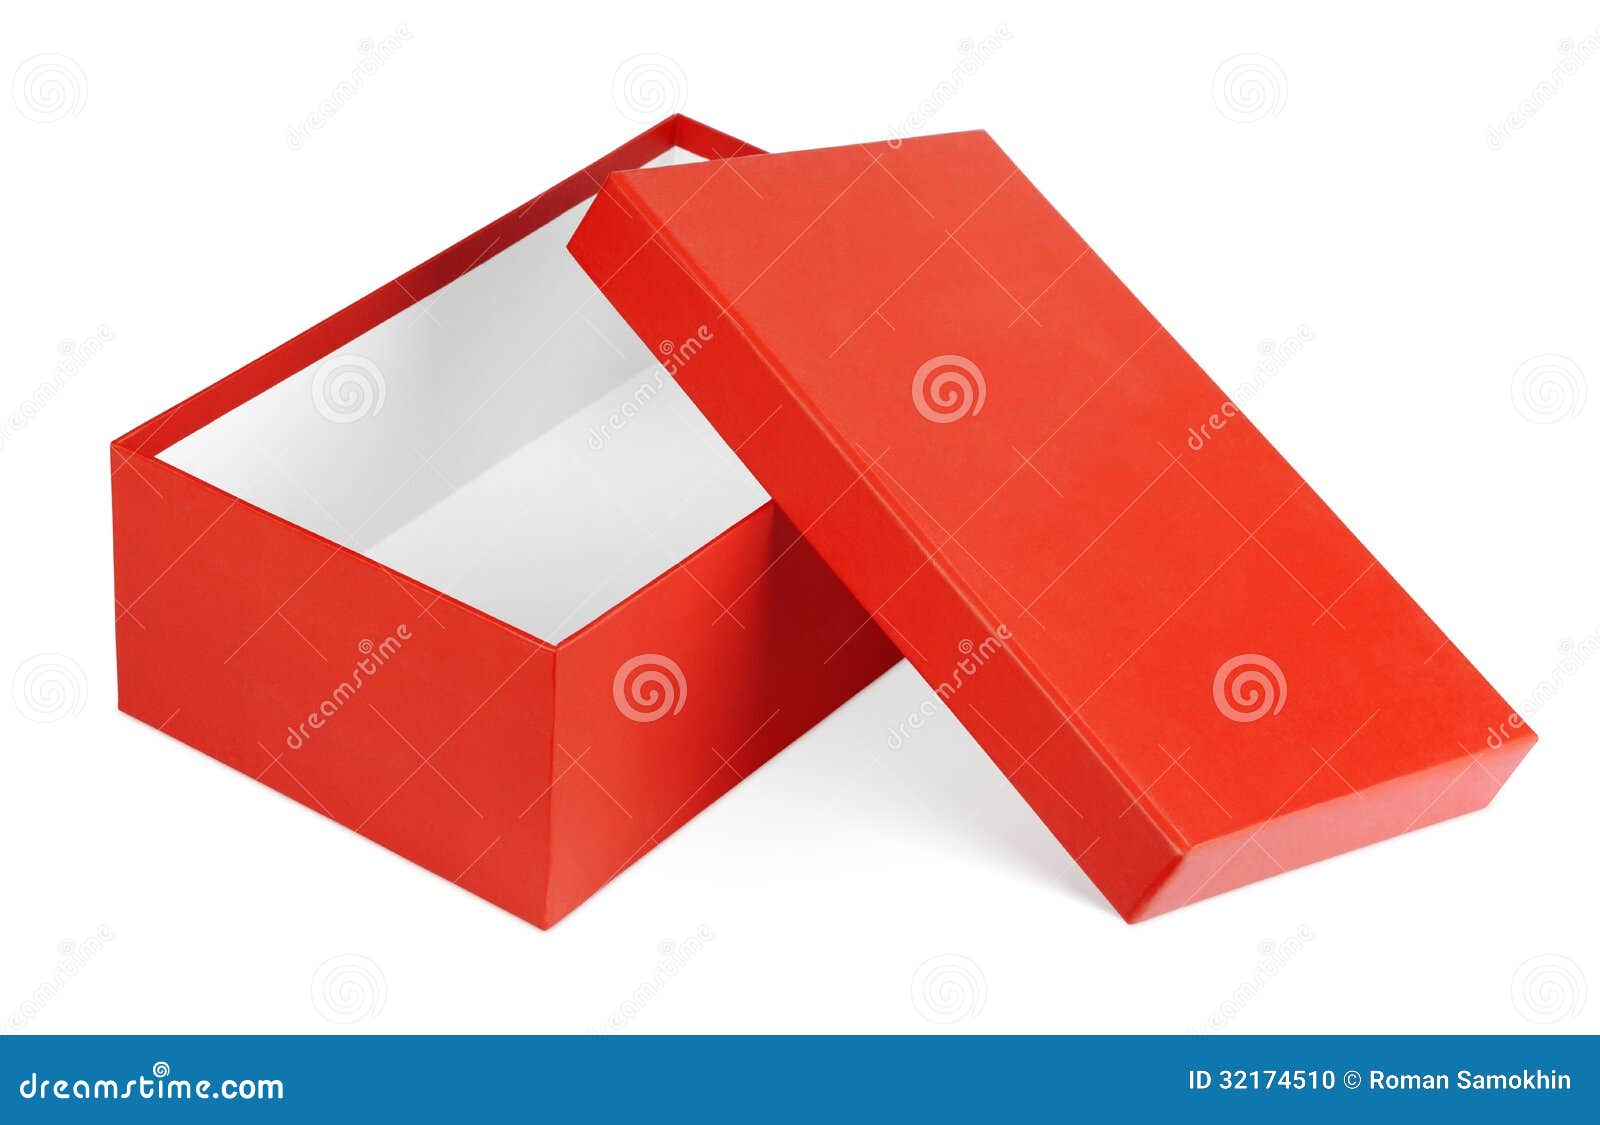 red-shoe-box-isolated-white-open-clipping-path-32174510.jpg